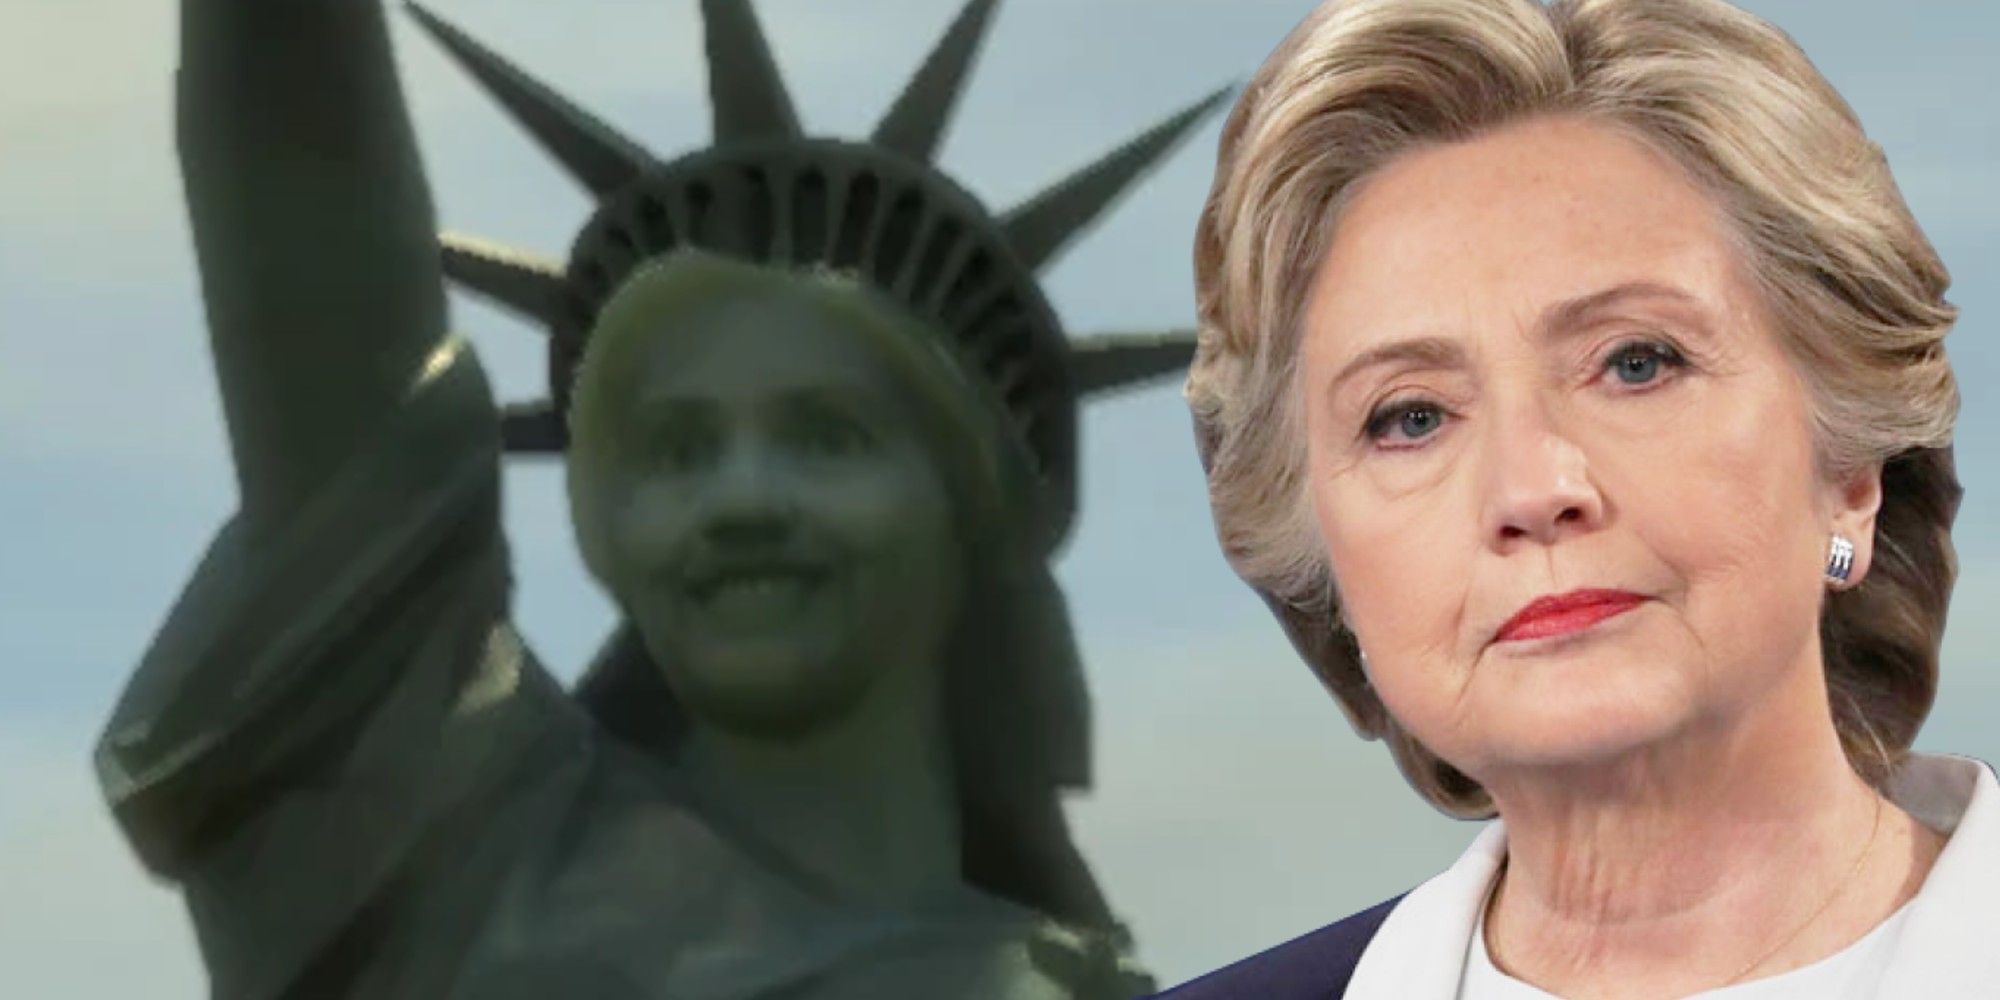 GTA 4 Statue Of Happiness Resembles Hillary Clinton 